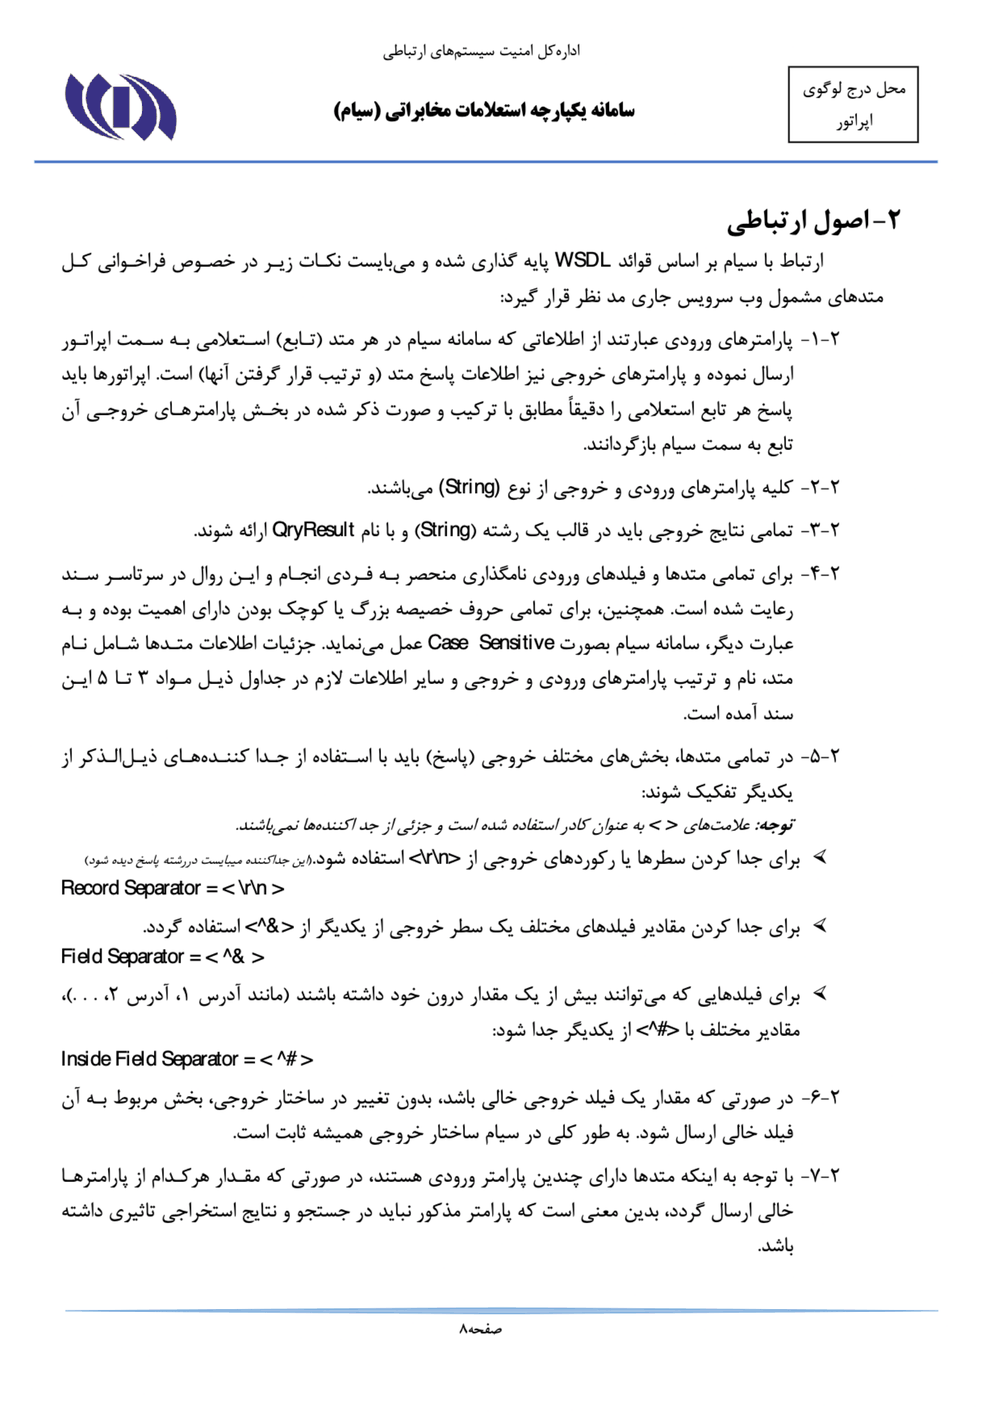 Page 8 from Iran’s SIAM Manual in Persian for Tracking and Controlling Mobile Phones